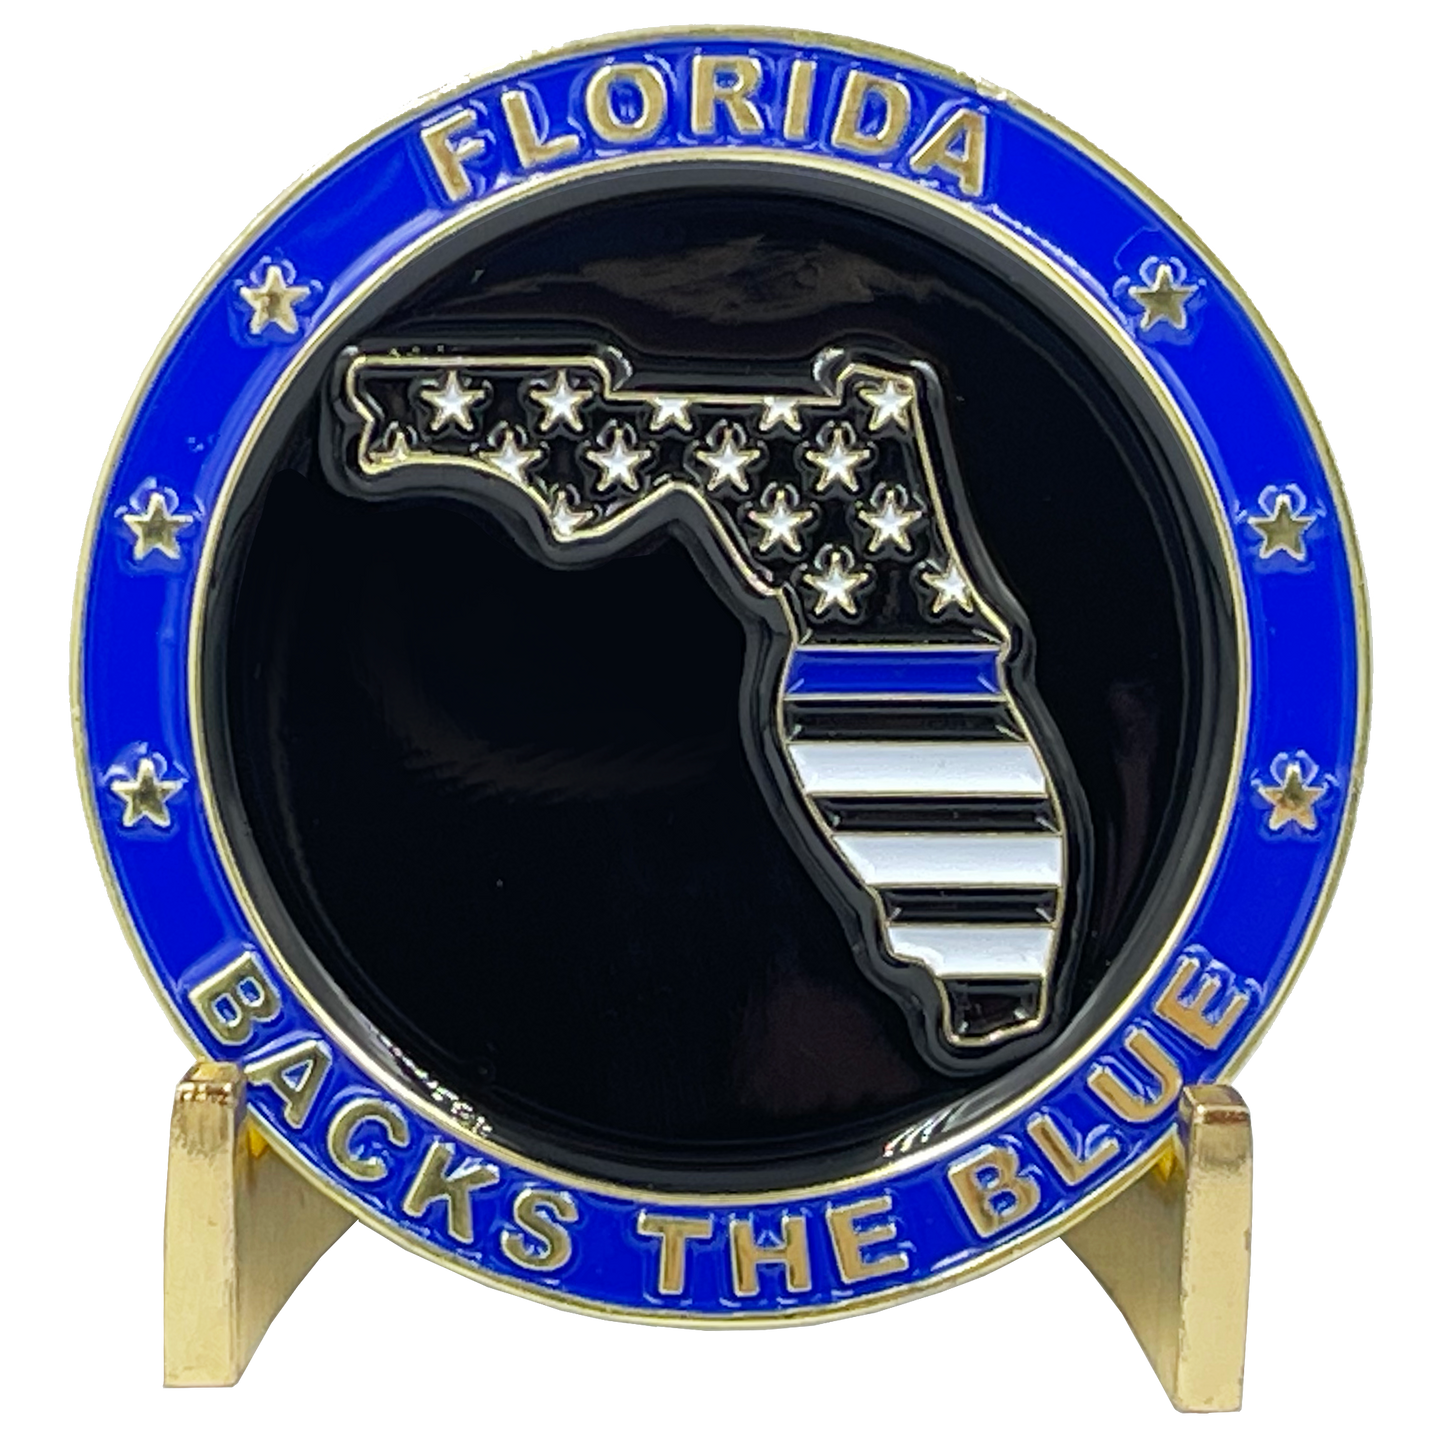 Discontinued BL3-002 Florida BACKS THE BLUE Thin Blue Line Police Challenge Coin with free matching State Flag pin back the blue FHP Miami BSO Sheriff CBP Tallahassee Tampa Orlando Jacksonville trooper